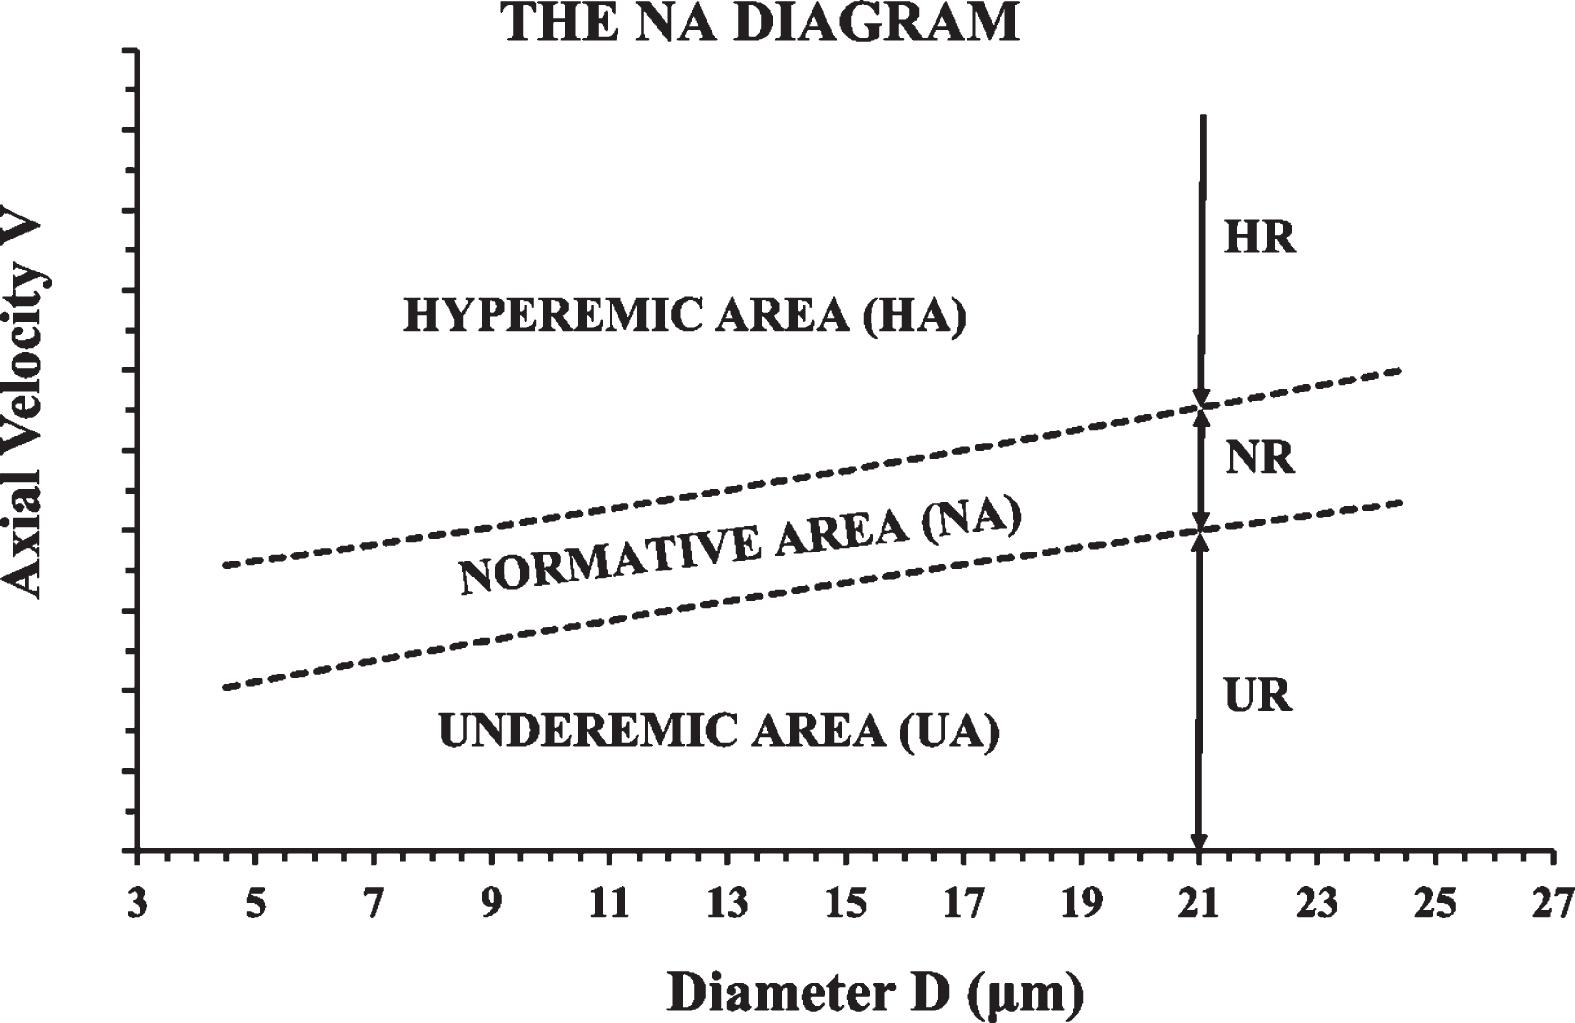 The normative area (NA) diagram. The NR, UR, and HR described in the previous figure (Fig. 3), are shown here, for the case of D = 21μm. Instead of calculating the NR for each diameter separately, the confidence interval of the V-D trendline can be used to define a “normative average axial velocity area” or “normative area” (NA) in short. The normative (or normemic) area (NA) is shown here between the two dashed lines. Velocities below the normative area are inside the “underemic area” (UA) of the diagram and velocities above the normative area are inside the “hyperemic area” (HA) of the diagram.